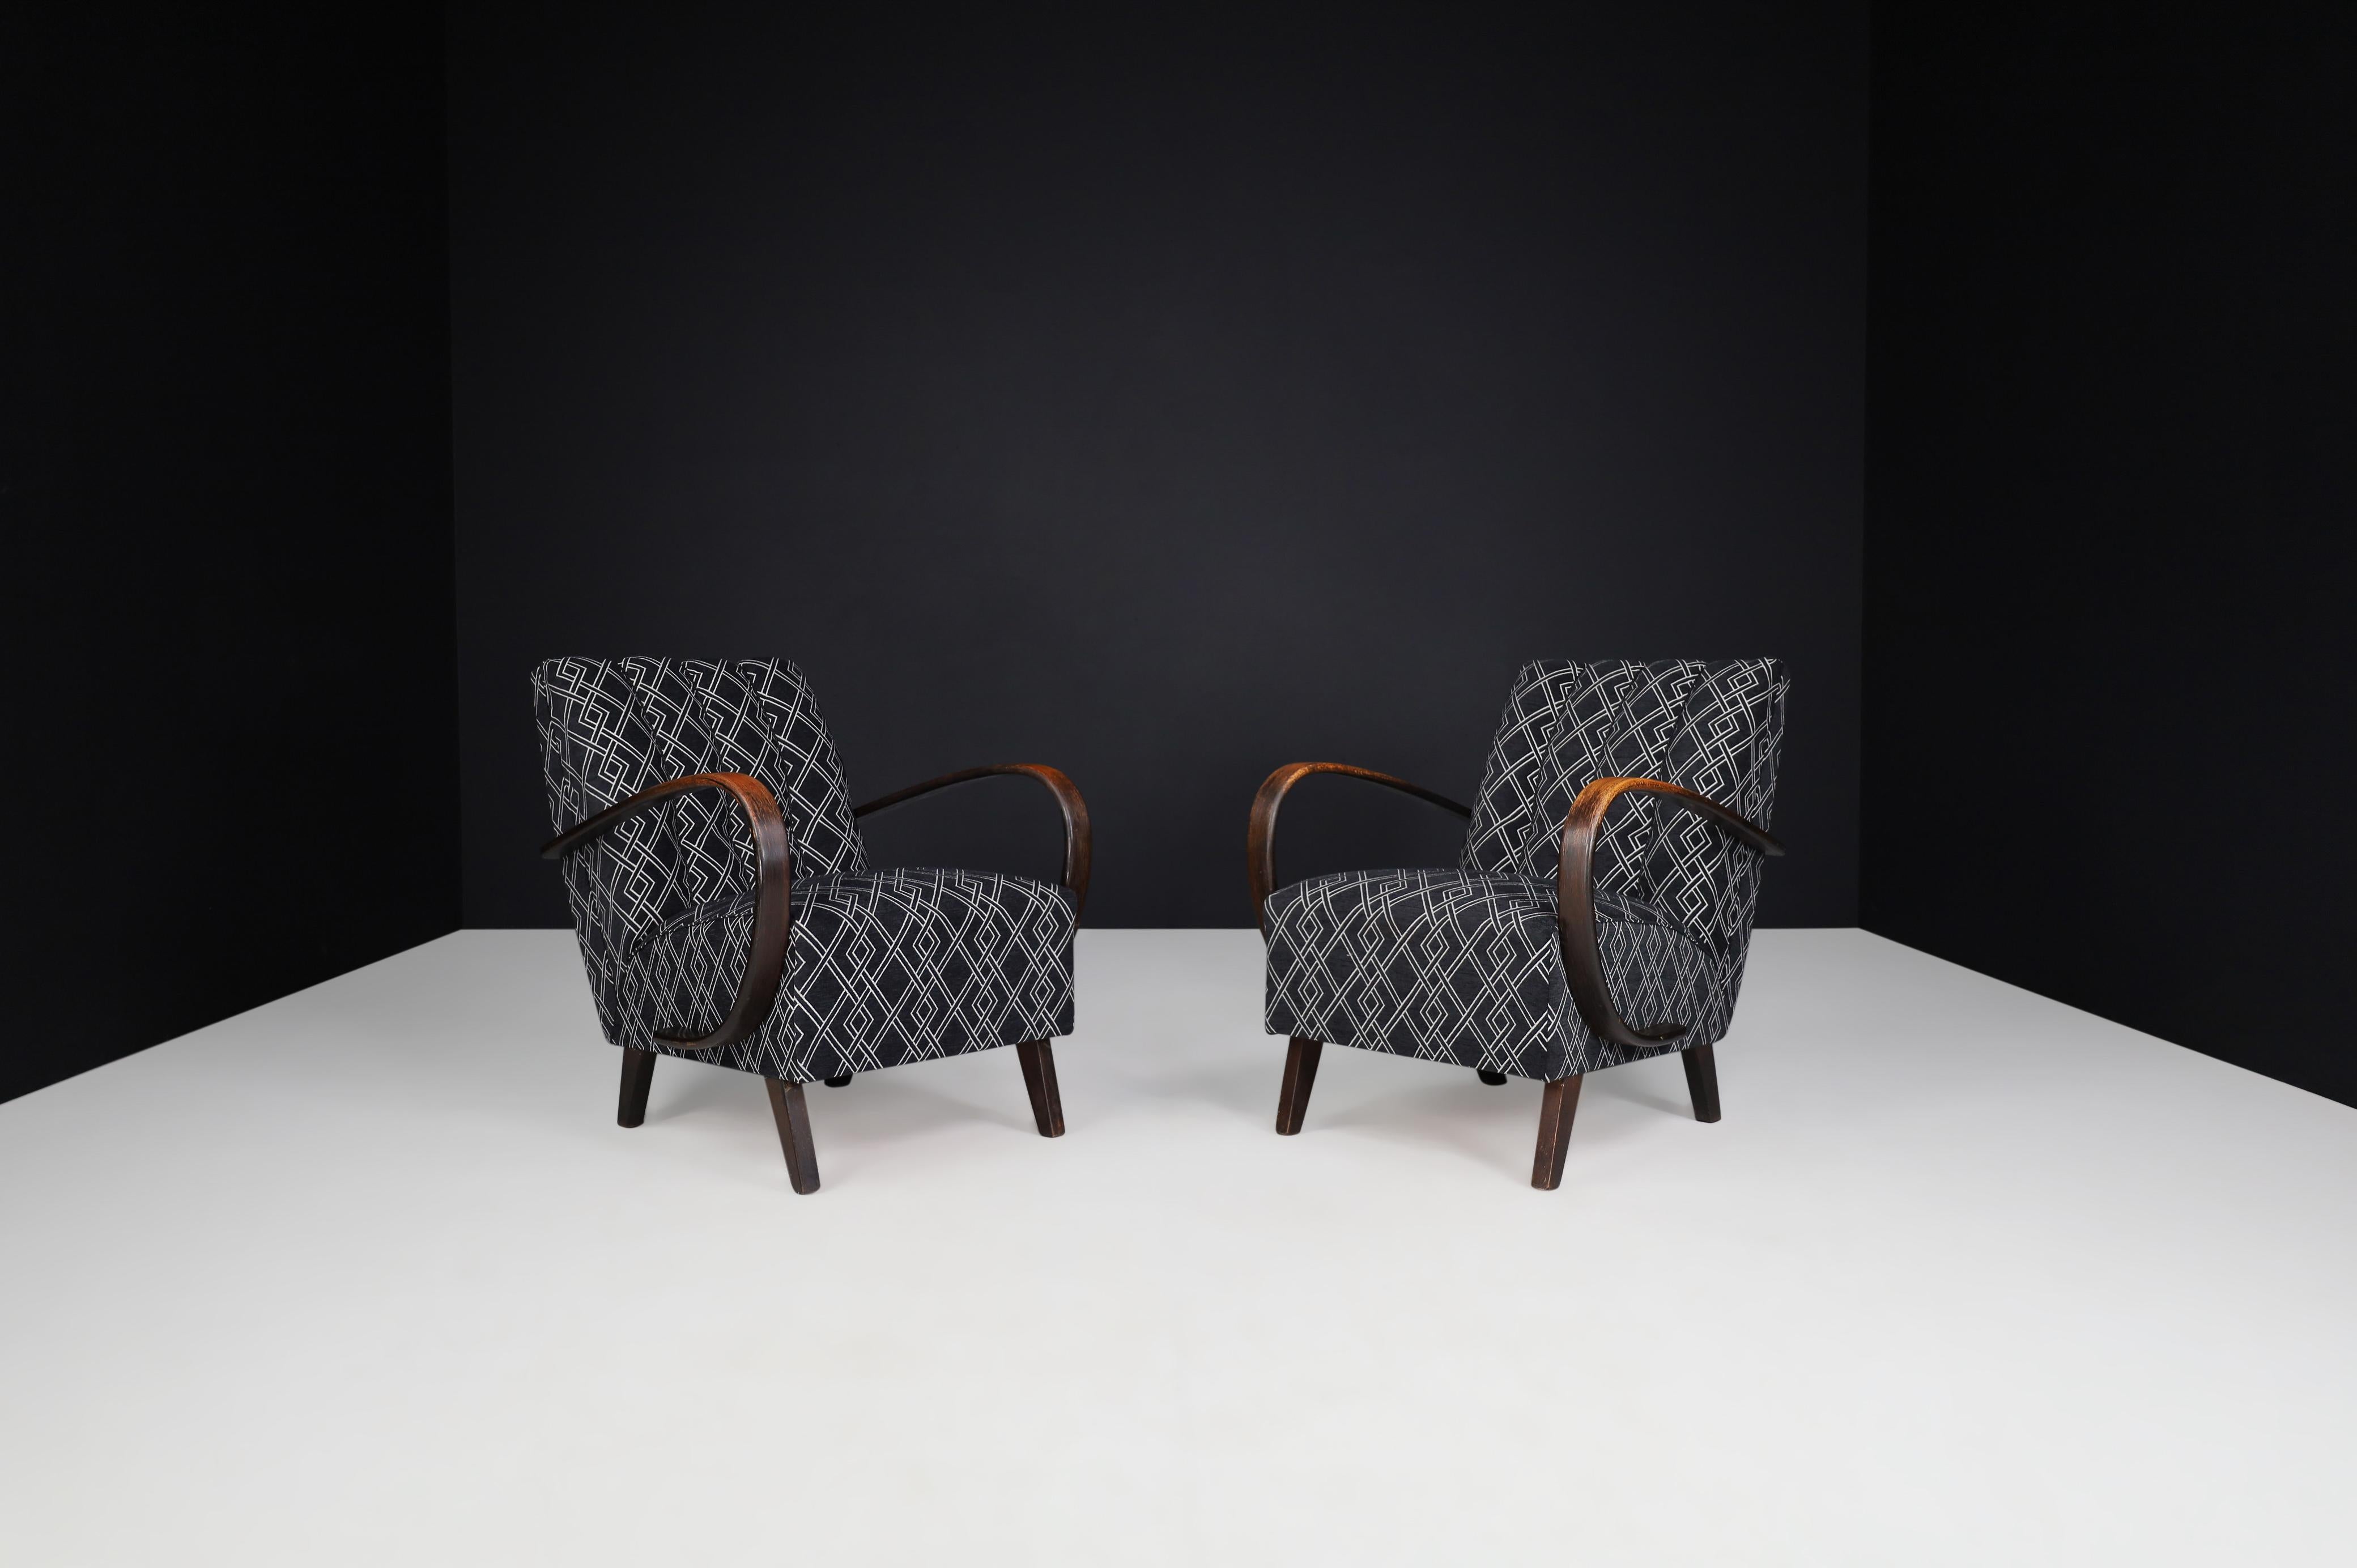 20th Century Jindrich Halabala Re-Upholstered Patinated Bentwood Lounge Chairs, 1940s For Sale